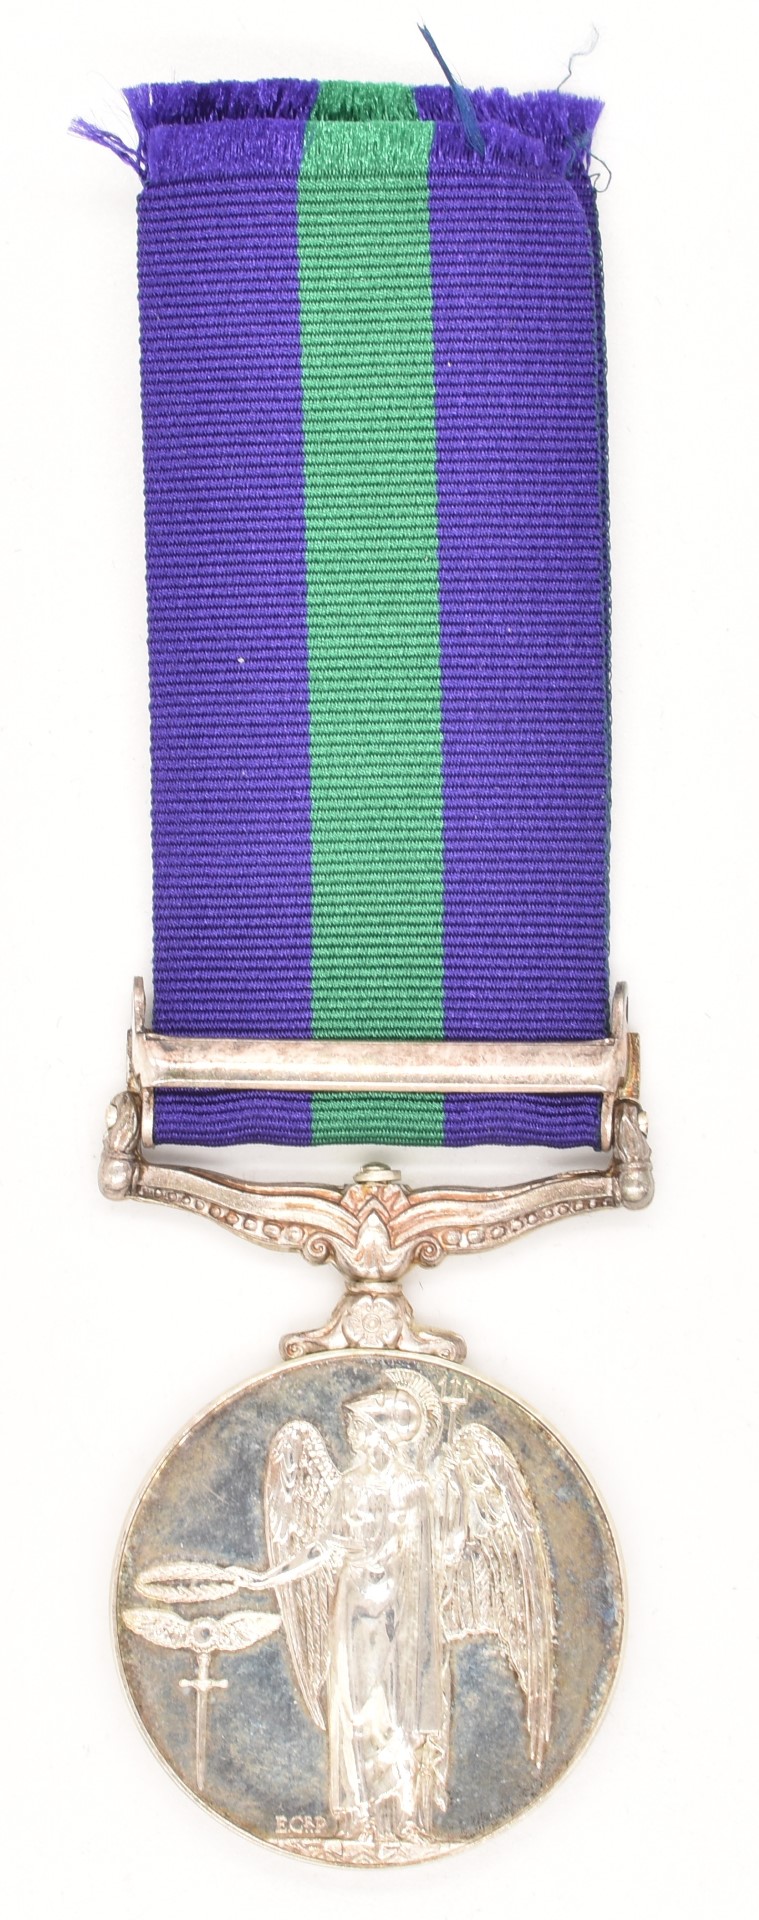 British Army General Service Medal with clasp for Canal Zone named to 2258587 Pte R Fineman, Royal - Image 2 of 5